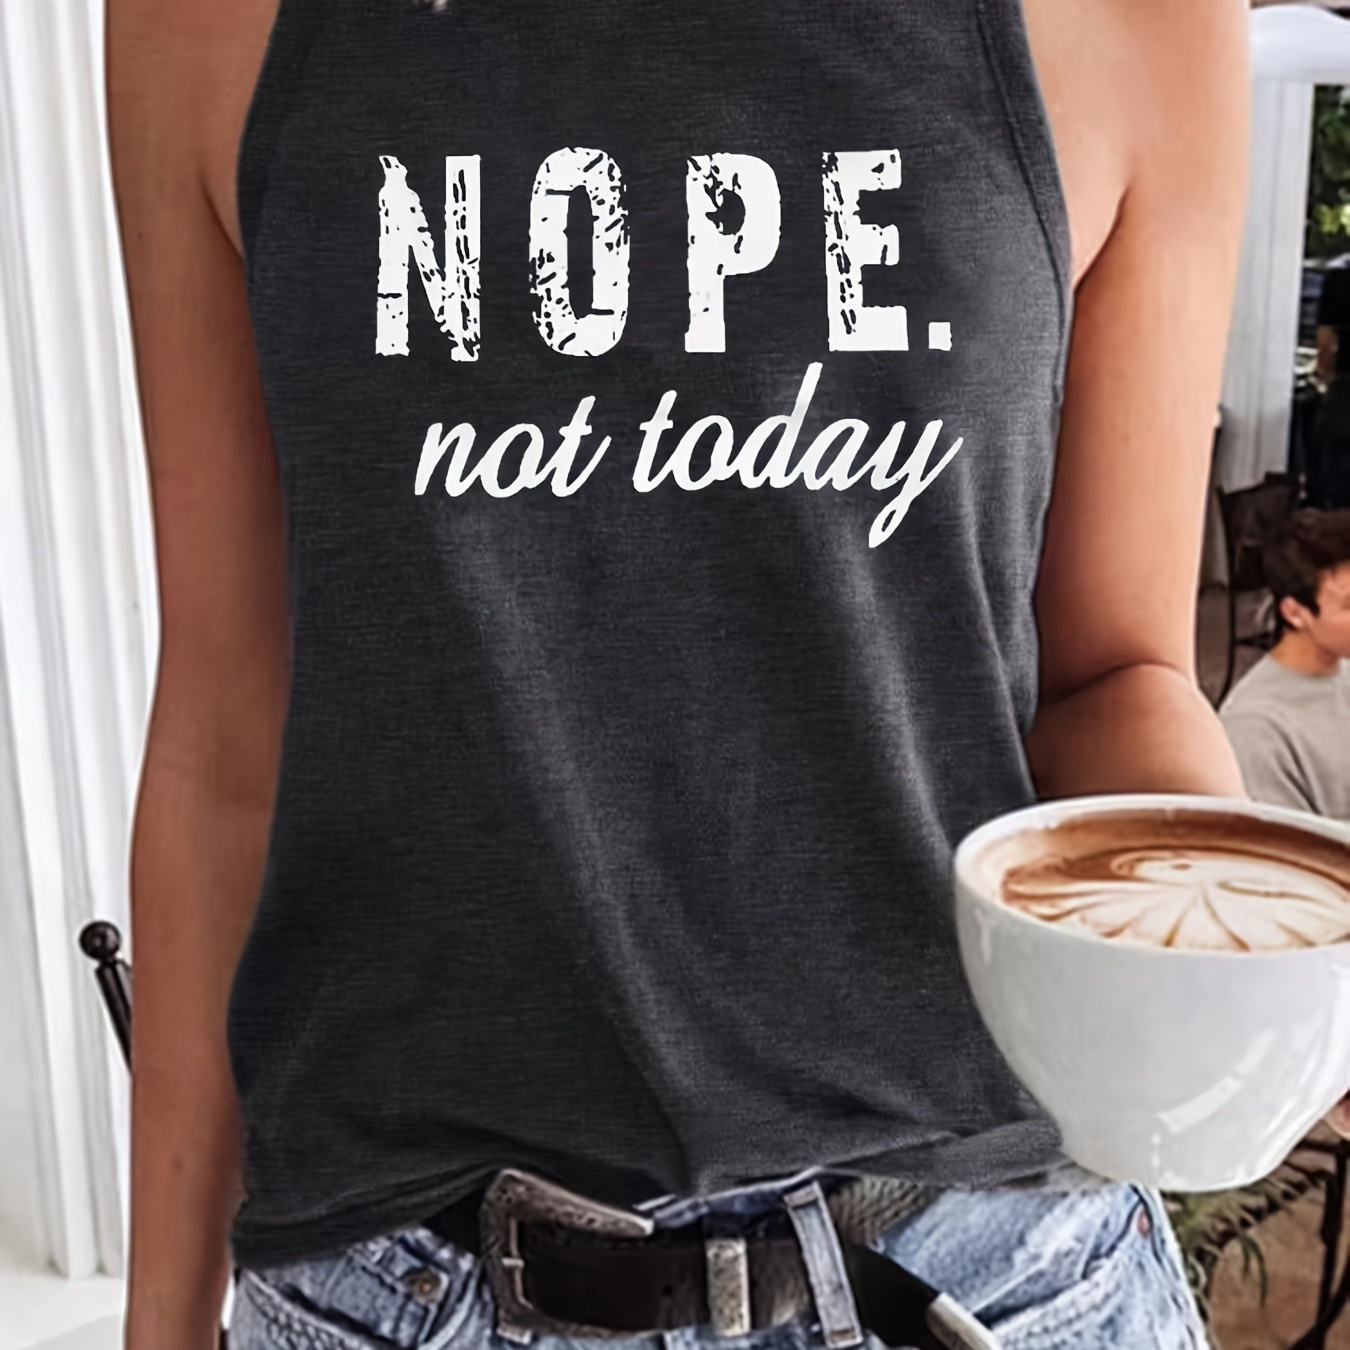 

Letter Print Crew Neck Tank Top, Casual Solid Nope Not Today Print Fashion Sleeveless Slim Tank Top, Women's Clothing